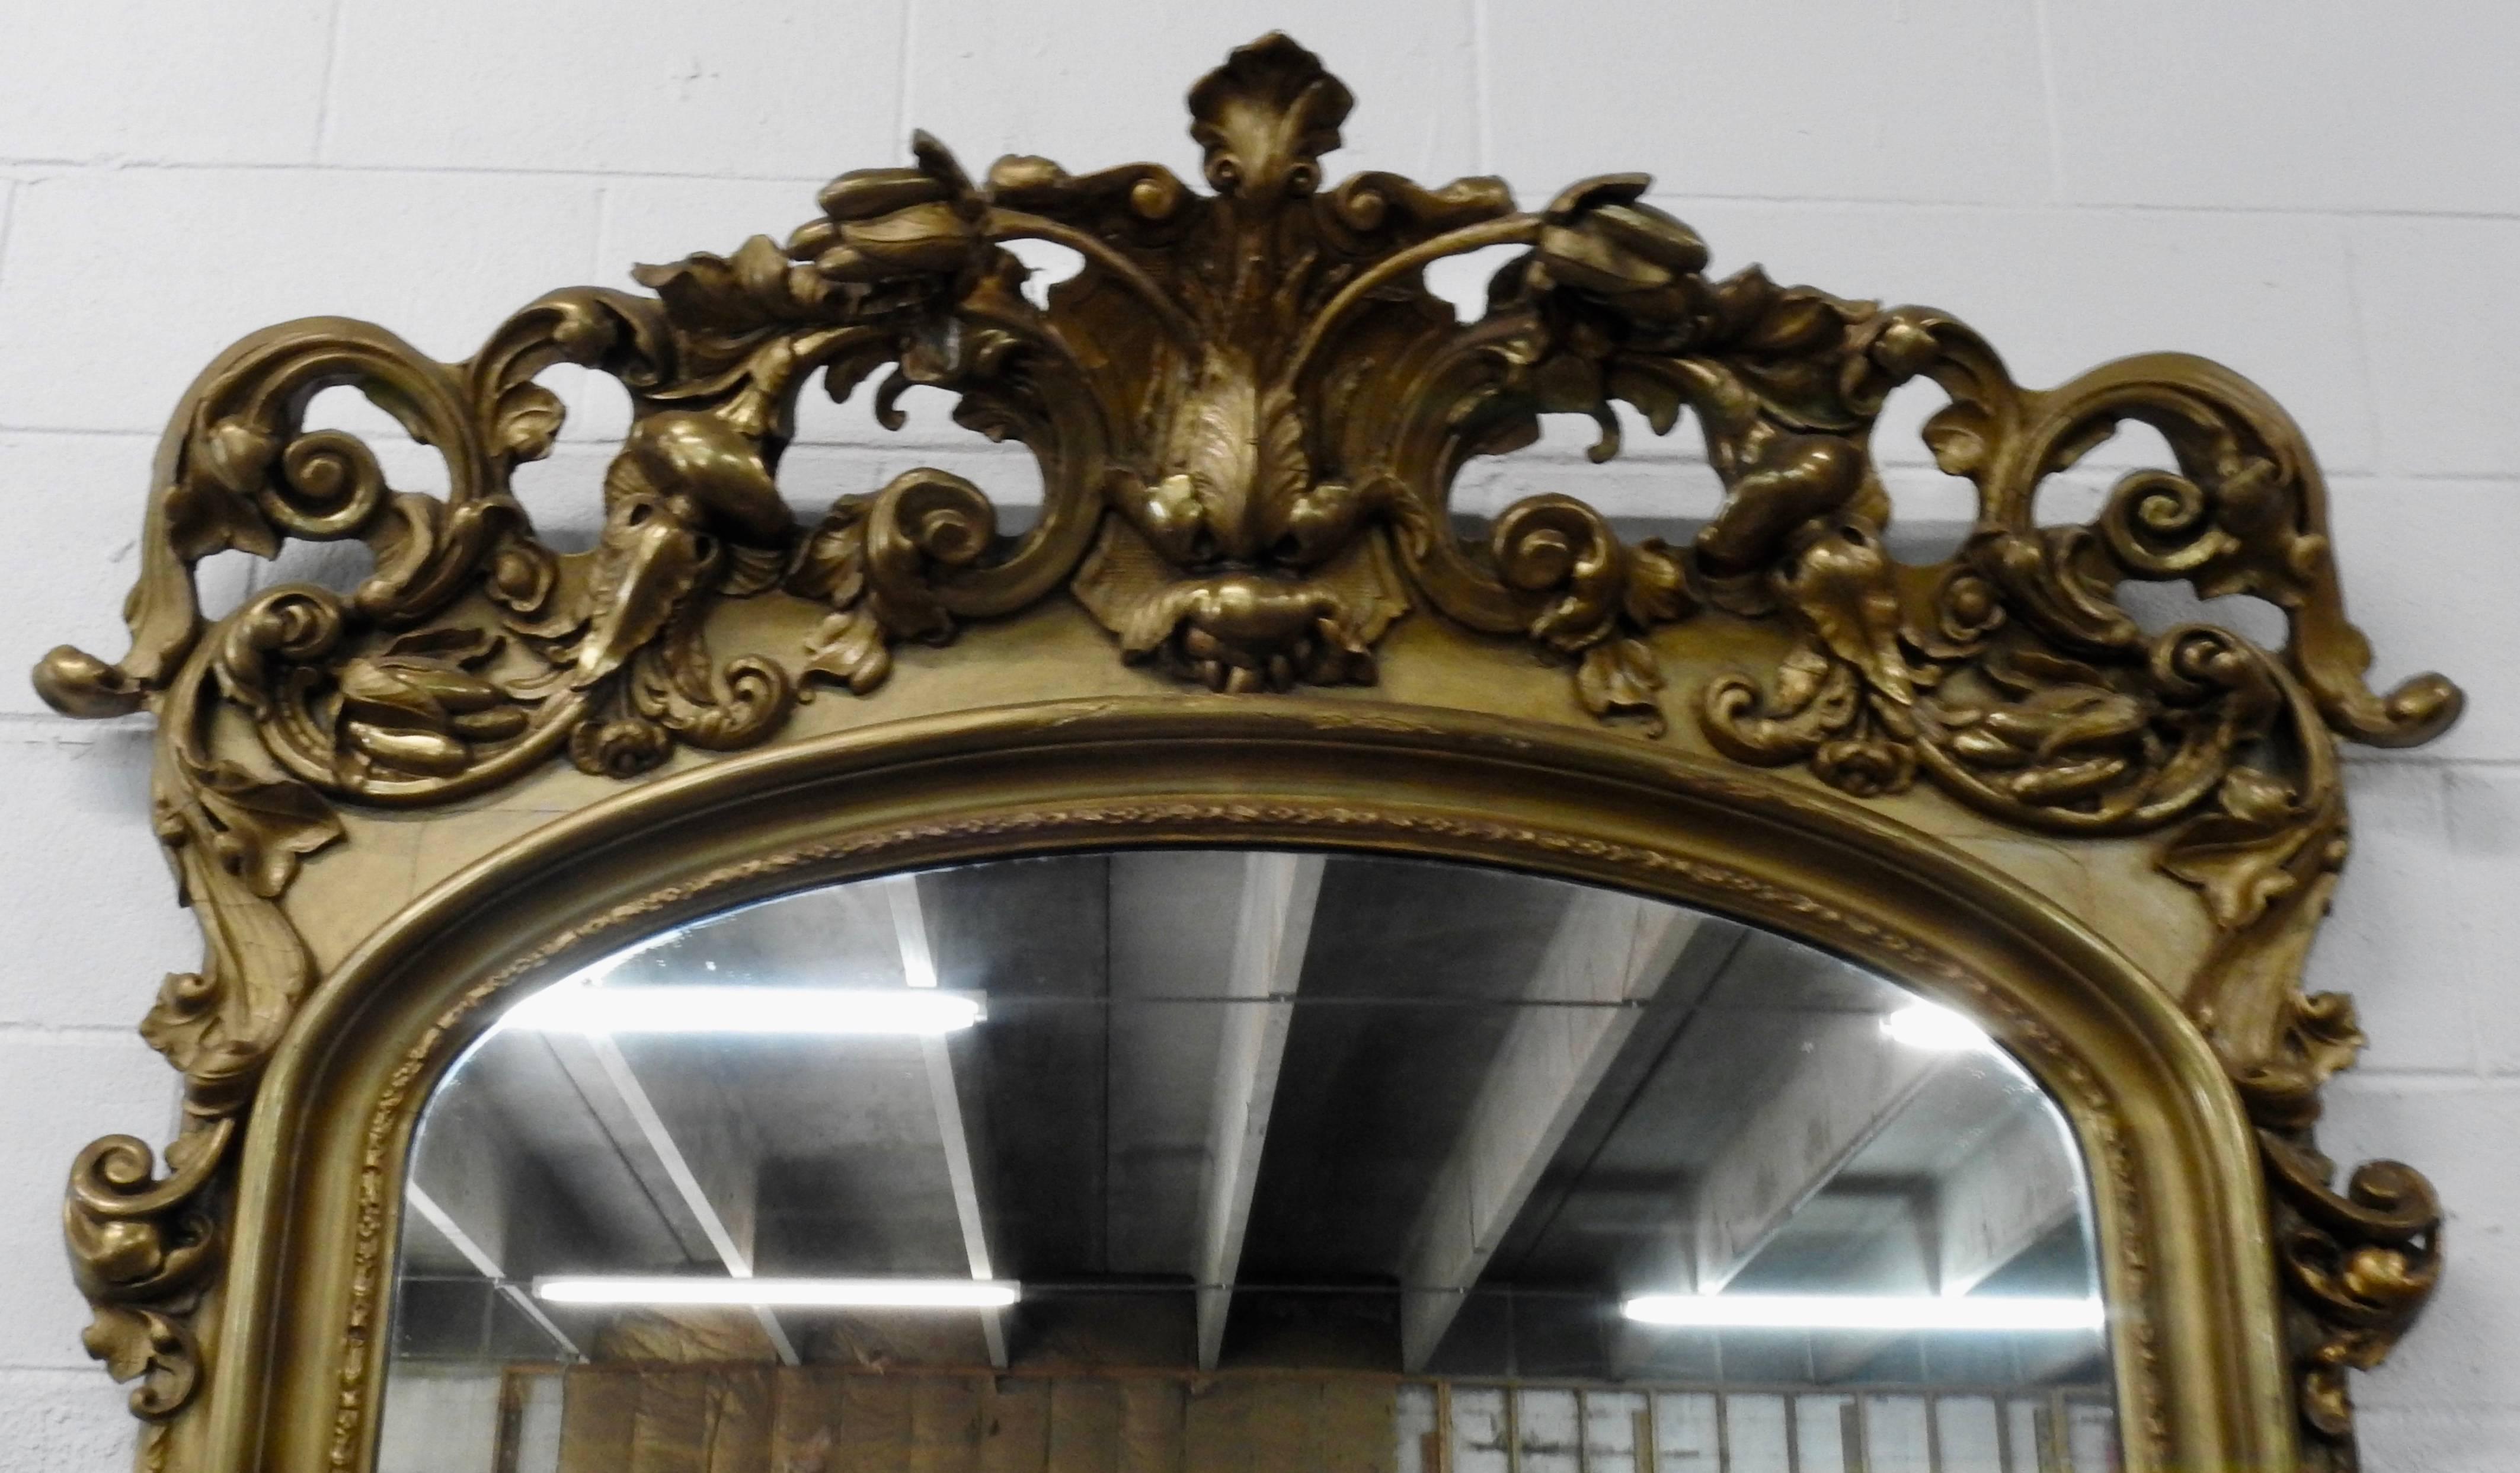 This is an elegant Victorian mirror that sits atop a beveled marble top pedestal with four cabriole legs. Beautiful scrollwork with a leaf motif add to the beauty of this piece. The pedestal has lots of openwork starting in the center with a shell